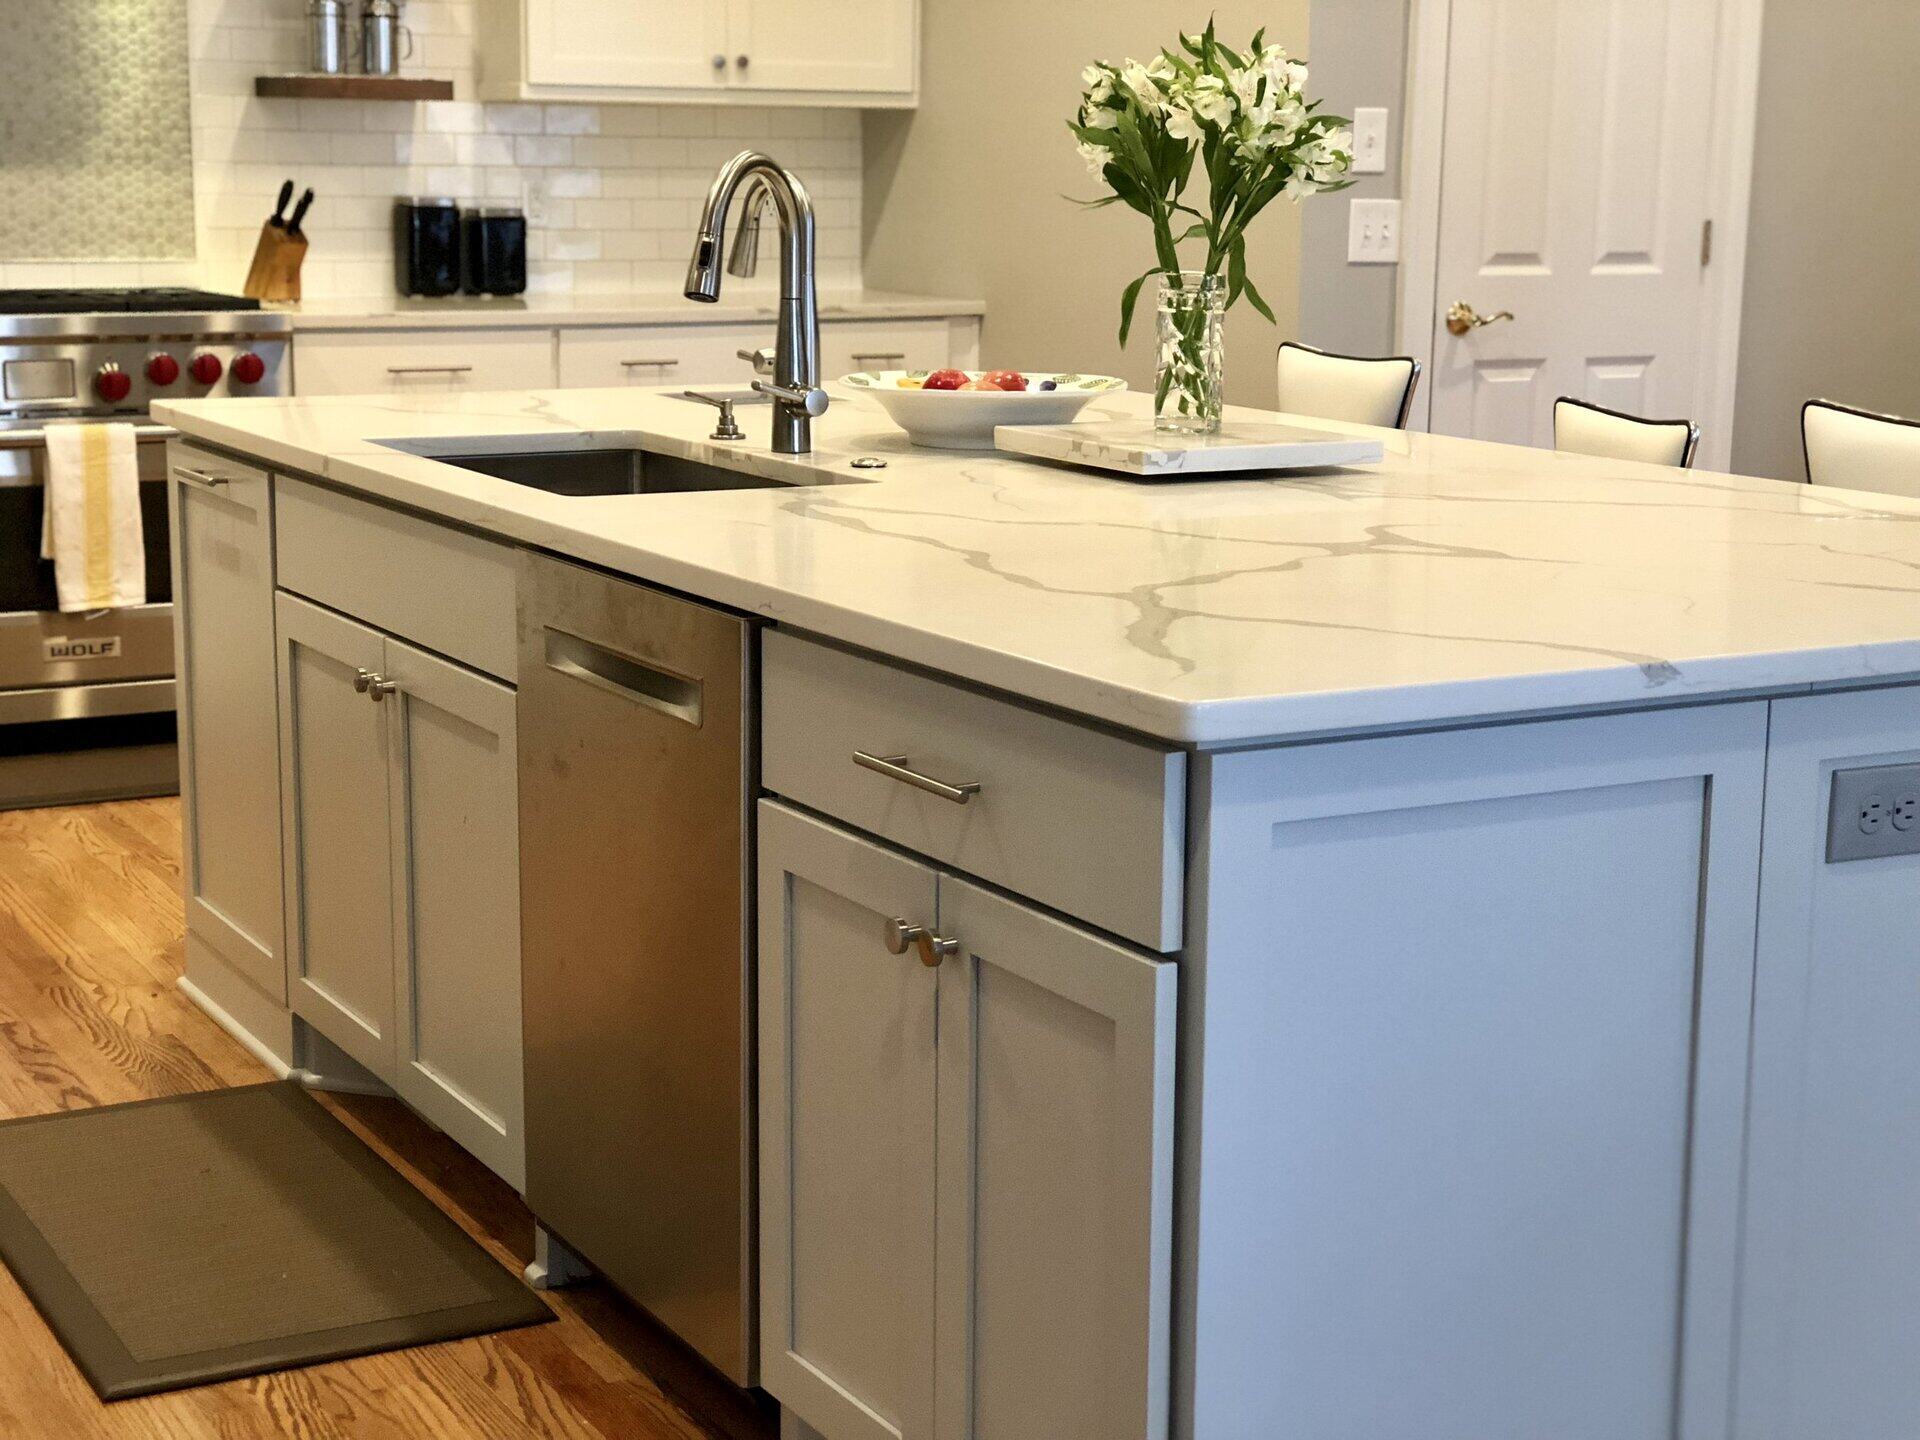 Where To Buy Kitchen Island With Sink And Dishwasher | Storables